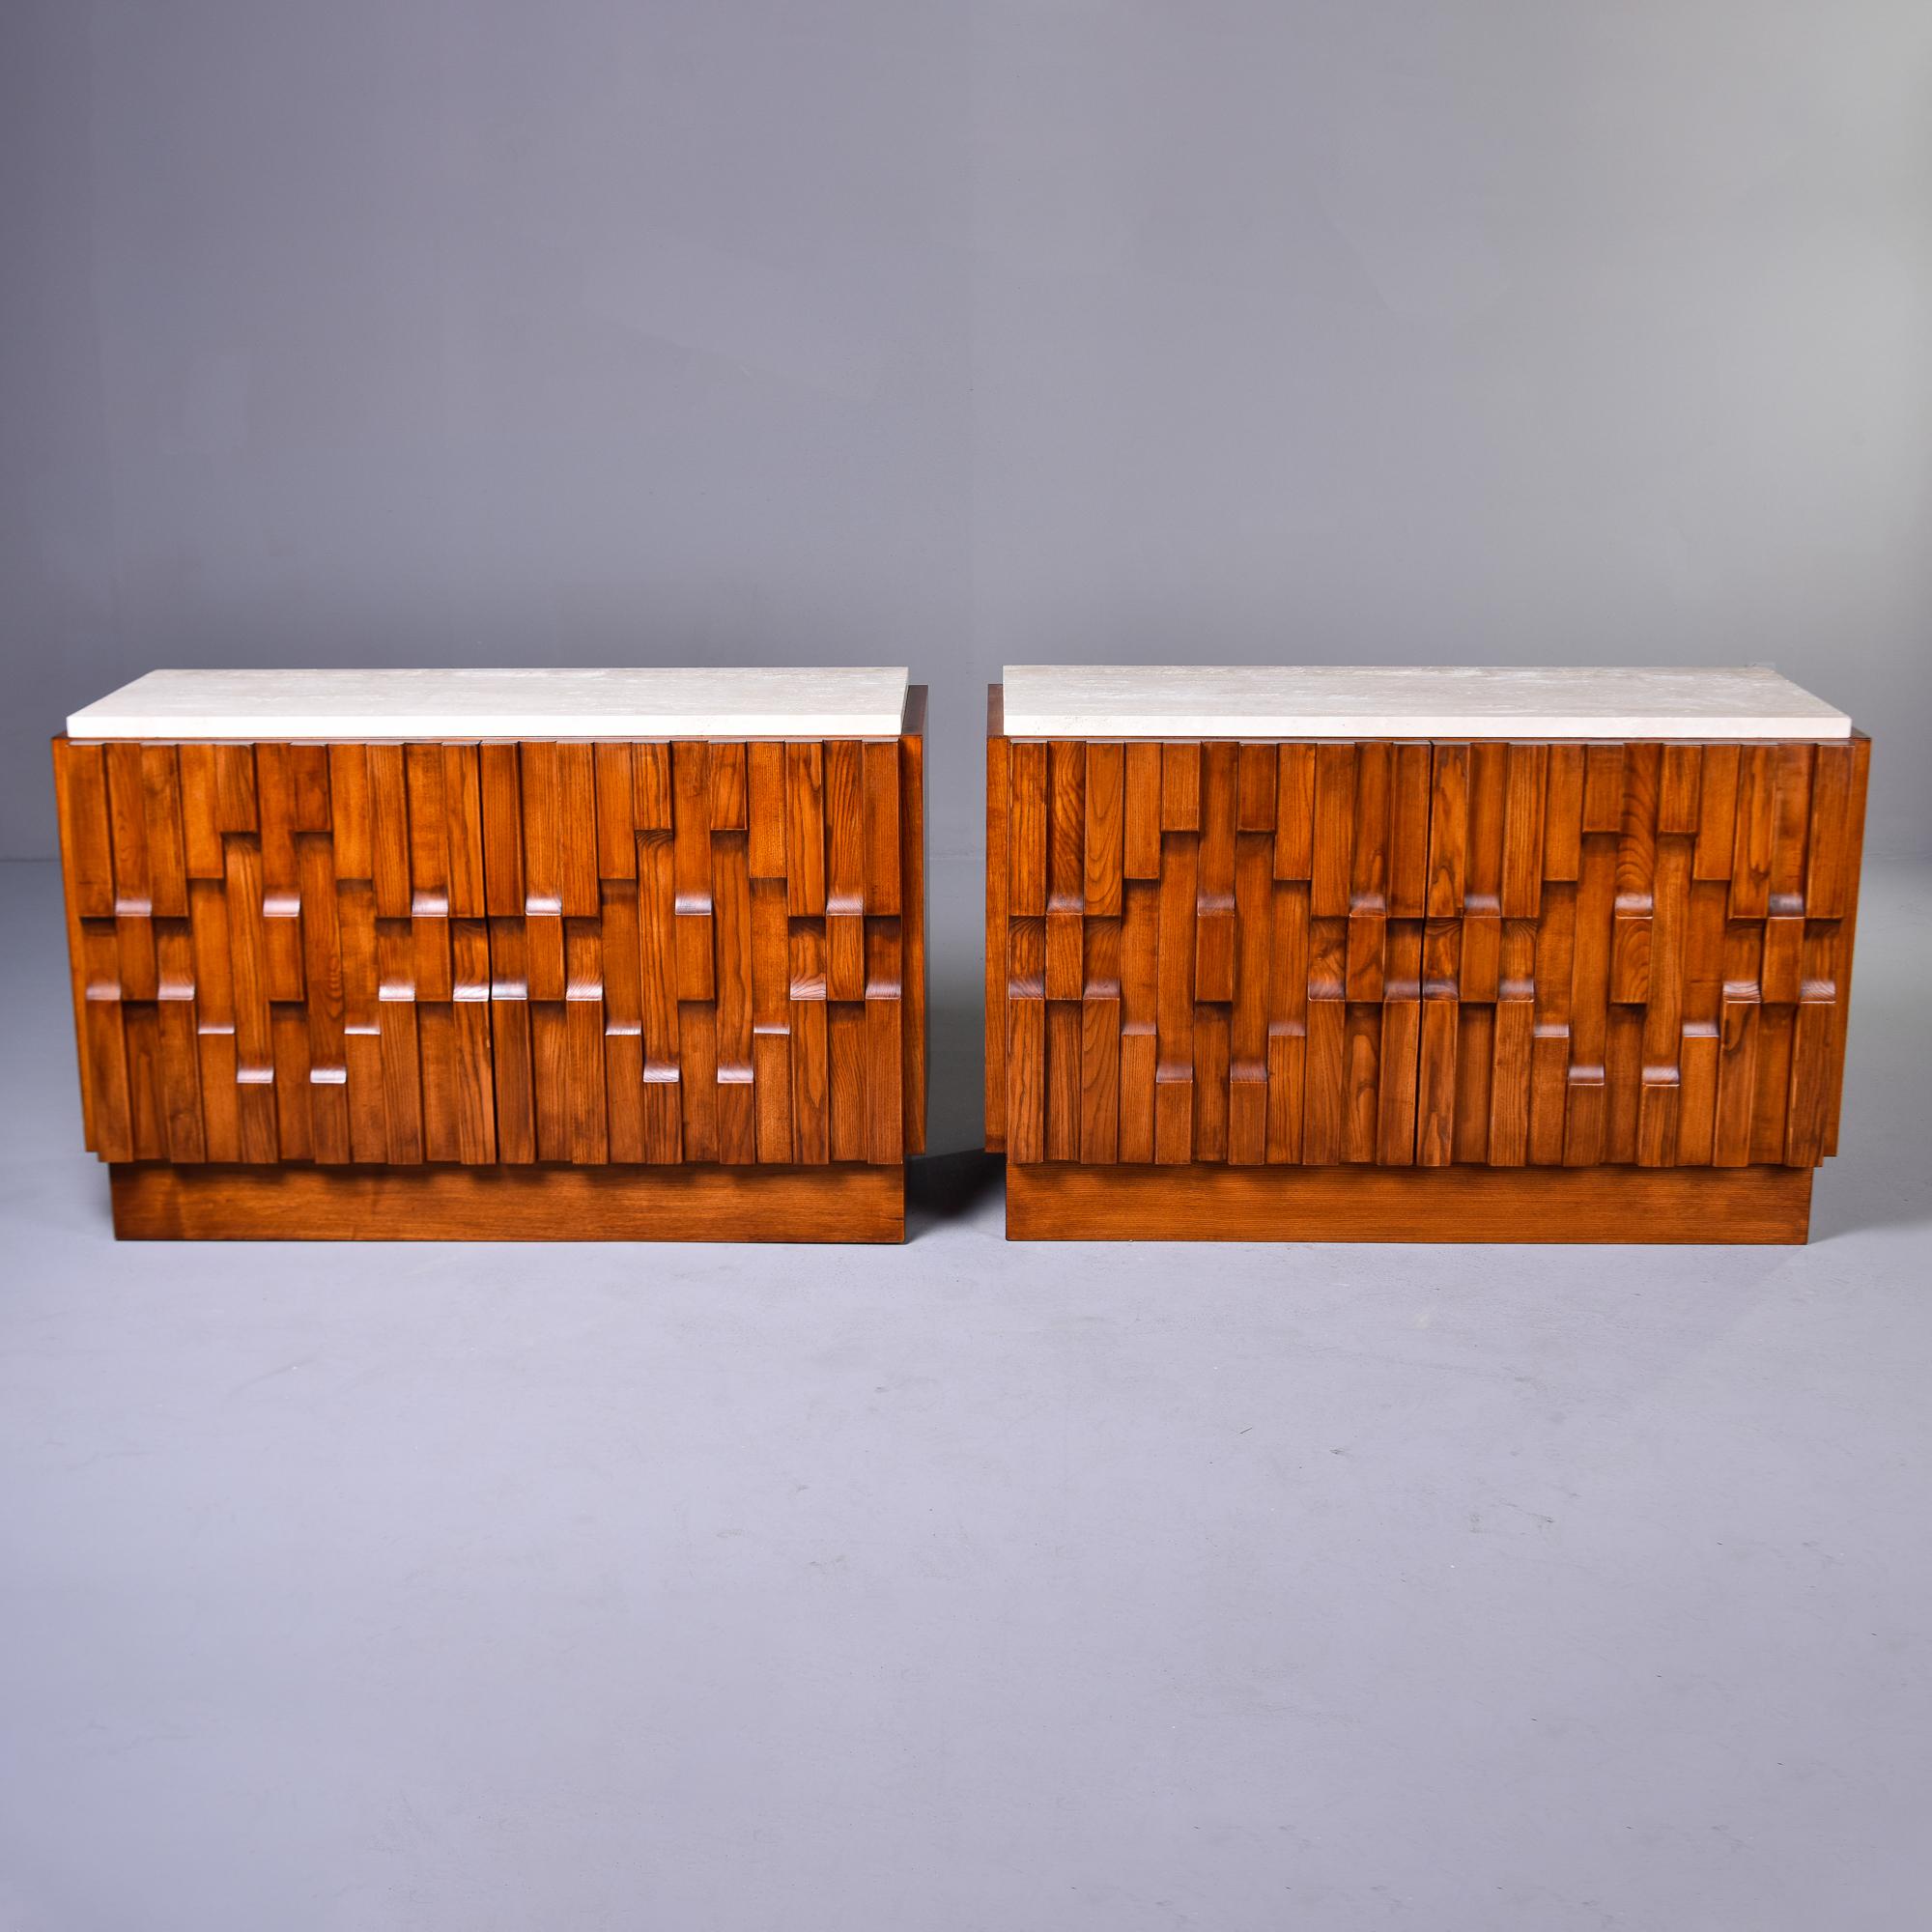 New and custom made for us in England, this pair of cabinets feature travertine tops and sculptural, cubist/brutalist - style fronts. Each cabinet has two hinged doors that open to reveal a storage compartment with a single, adjustable shelf. Each